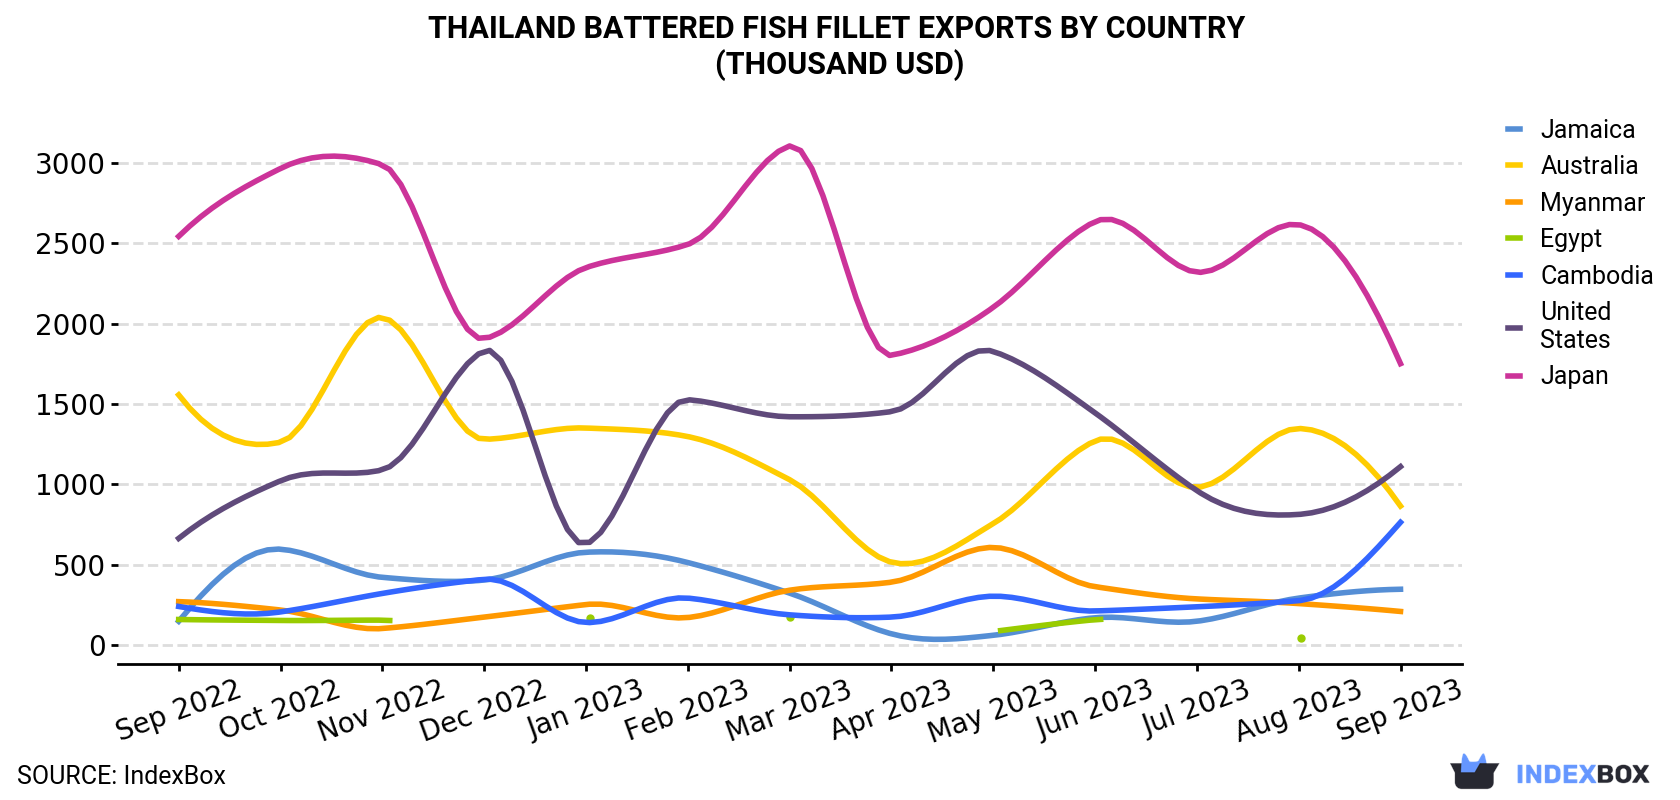 Thailand Battered Fish Fillet Exports By Country (Thousand USD)